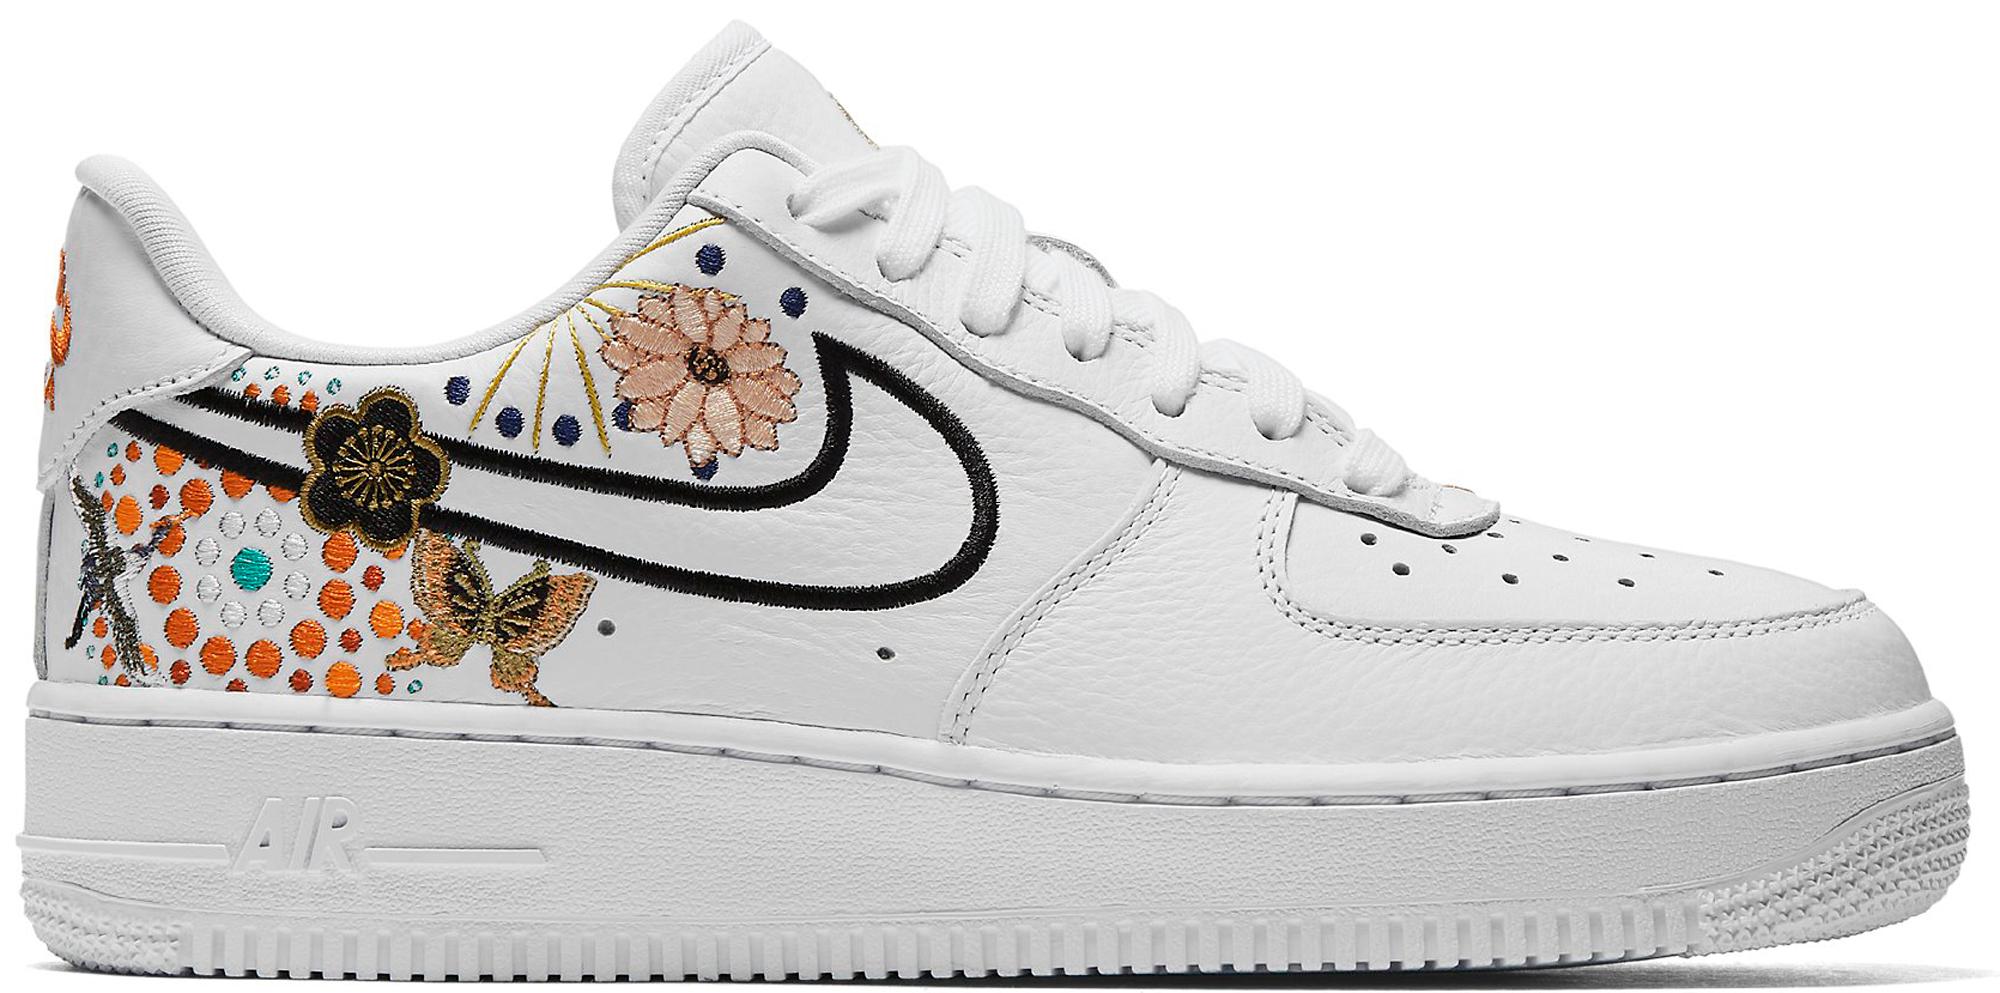 Women's Nike Air Force 1 Low Lunar New Year 2018